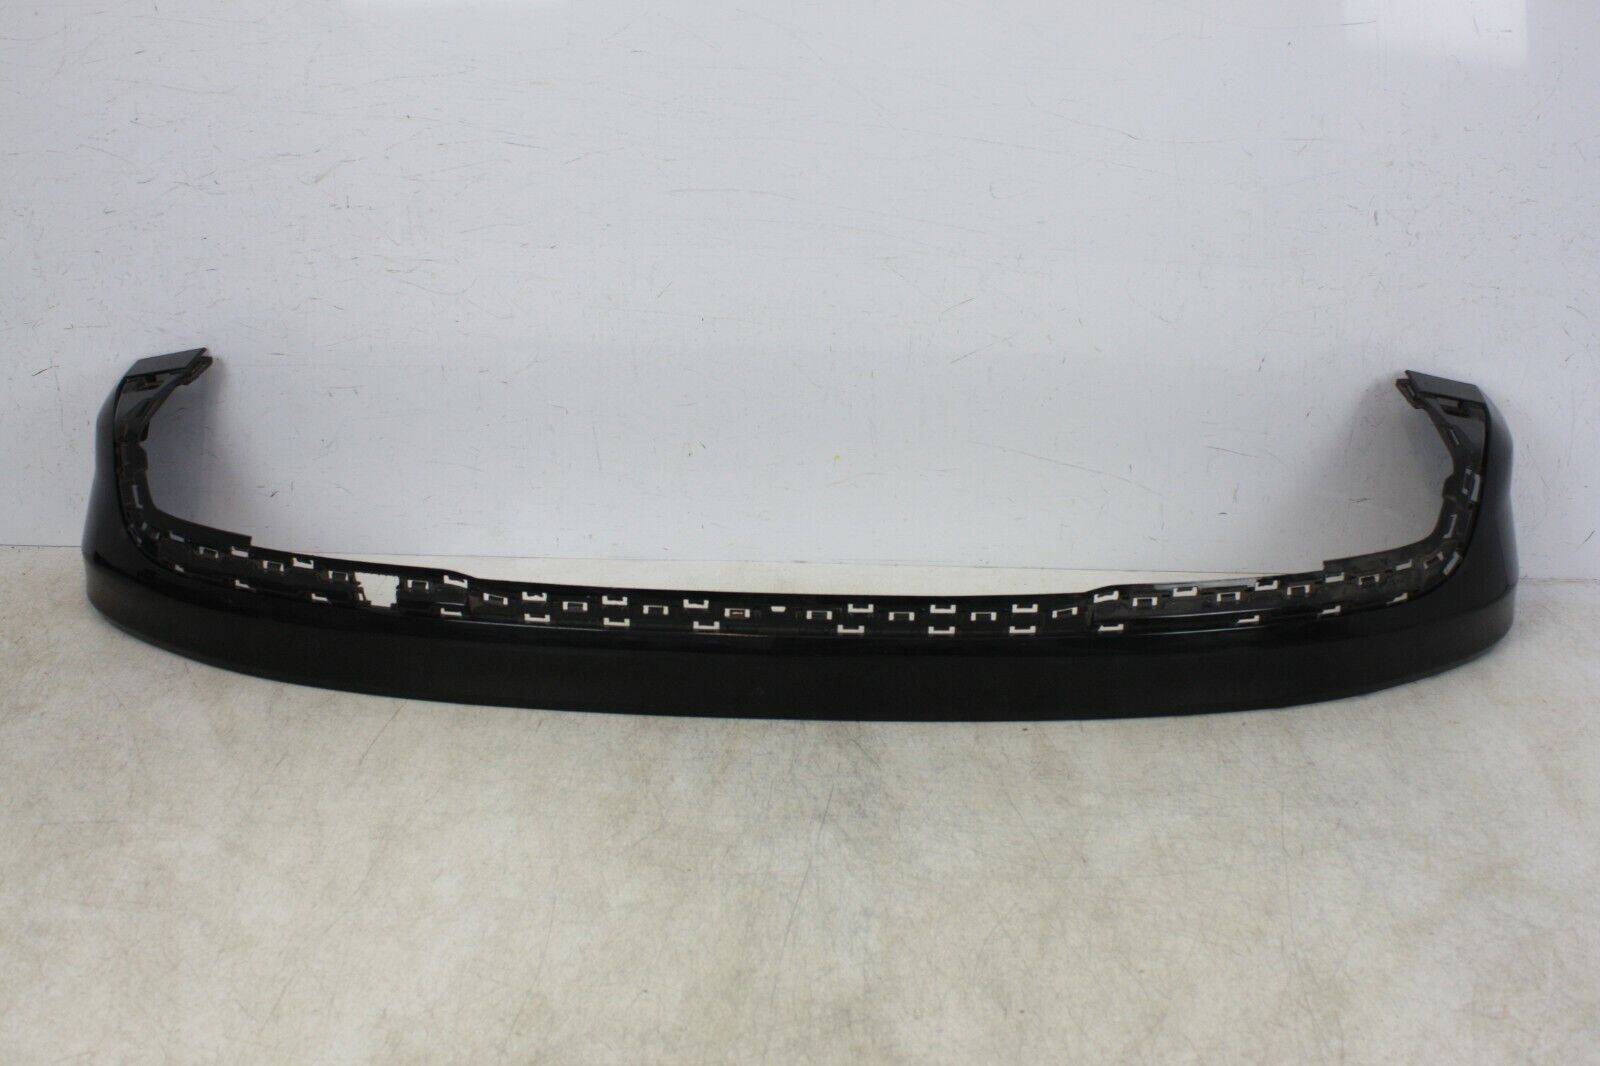 Audi Q2 S Line Rear Bumper Lower Section 2016 To 2021 81A807323A Genuine 176474555428